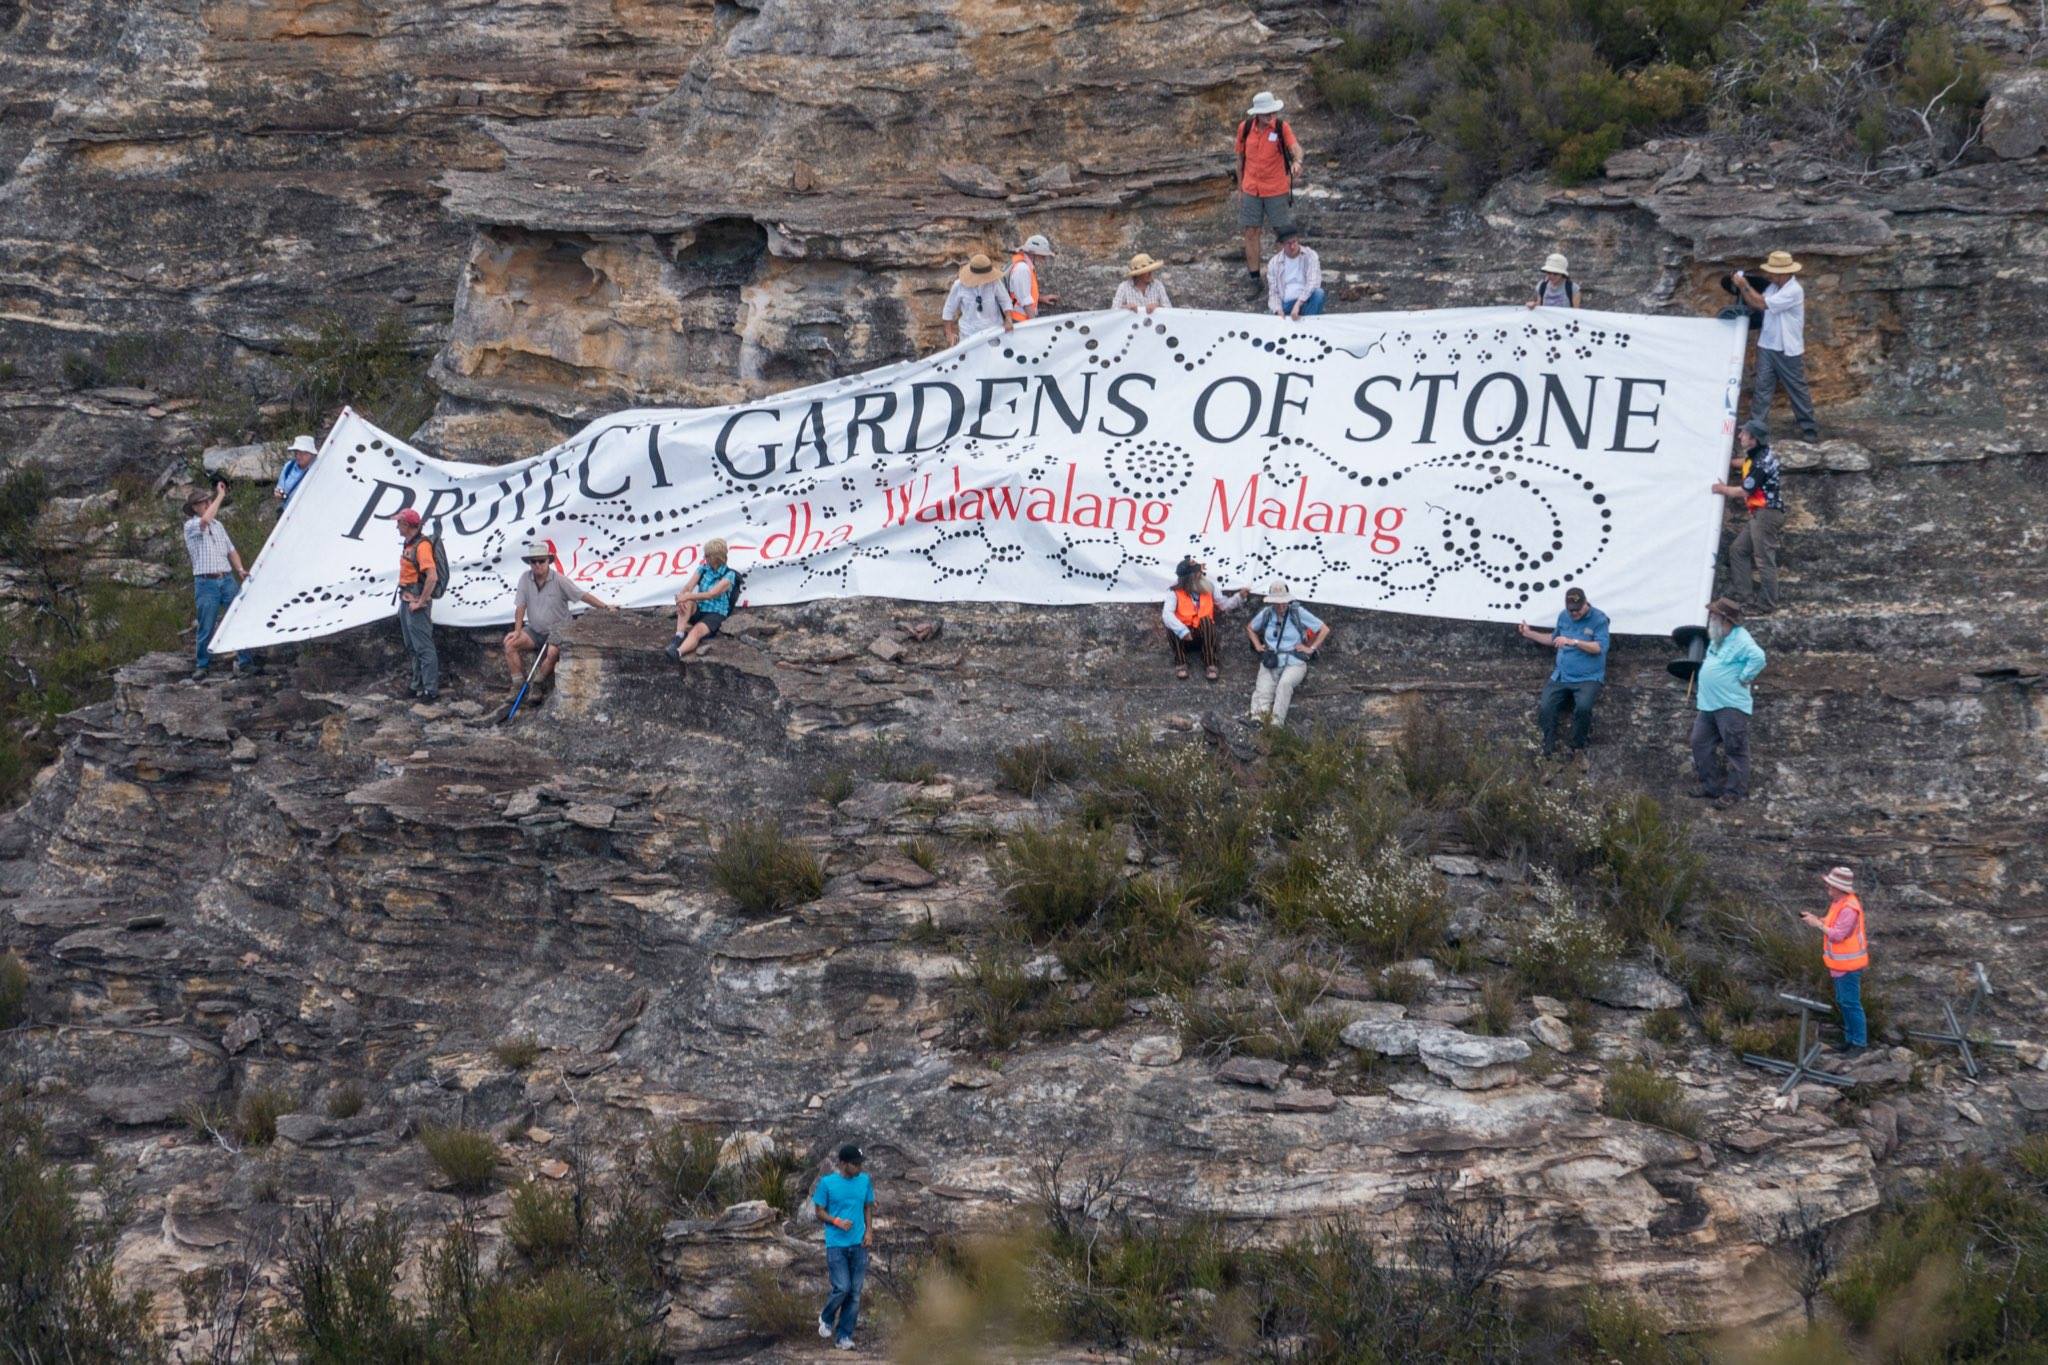 Protect the Gardens of Stone Banner